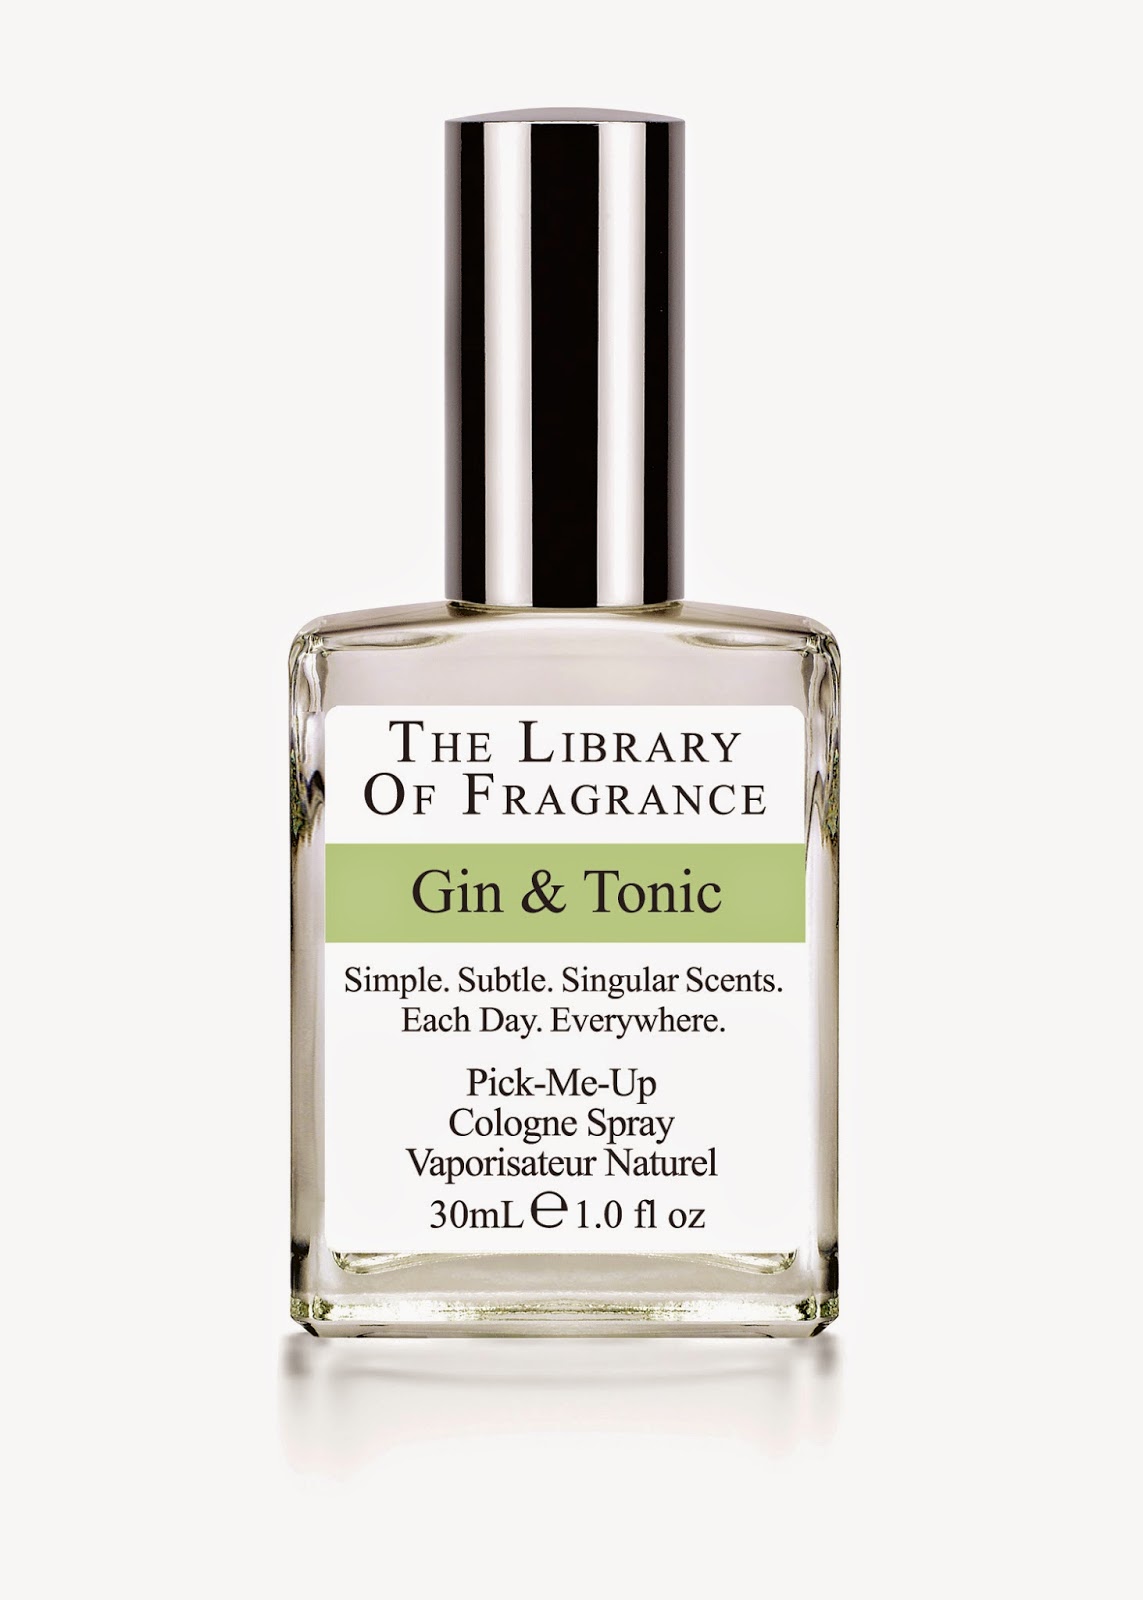 Gin and Tonic Fragrance